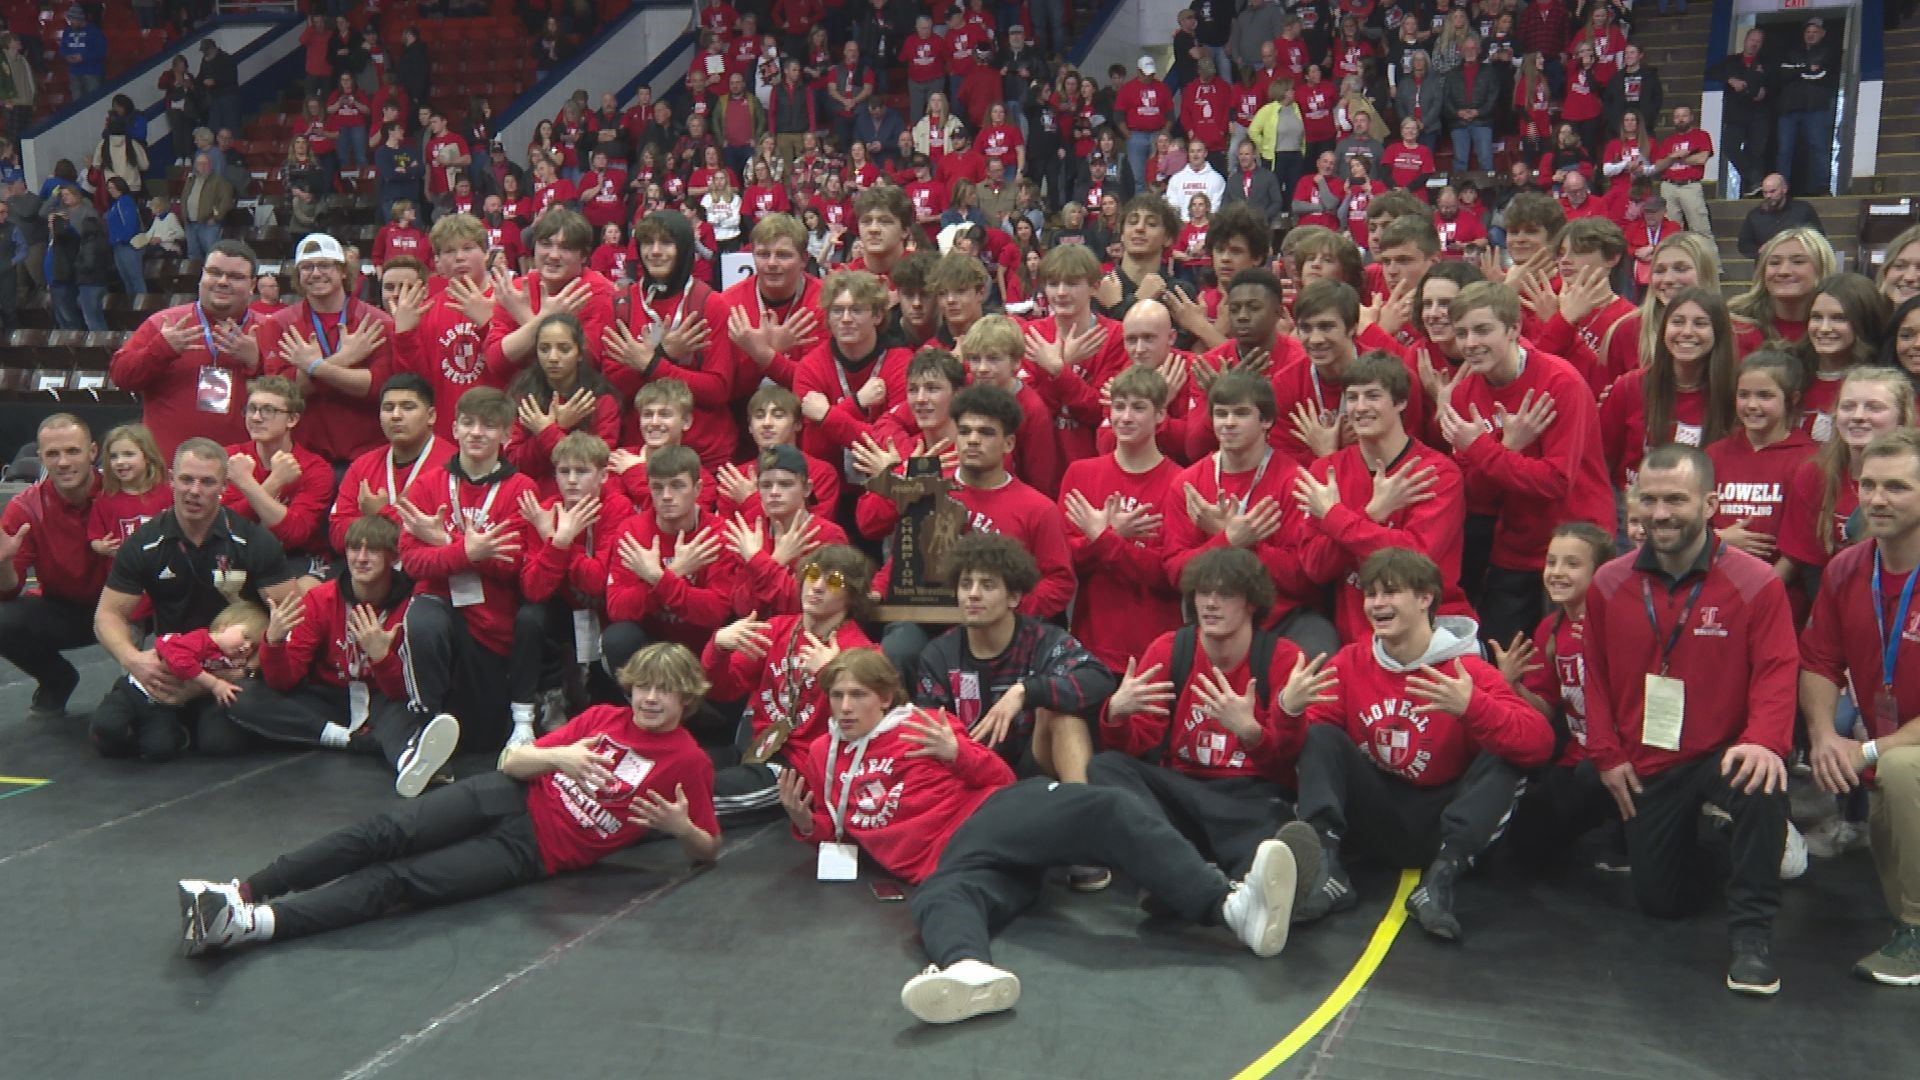 It has become an annual tradition at Lowell High School to win a wrestling state championship.